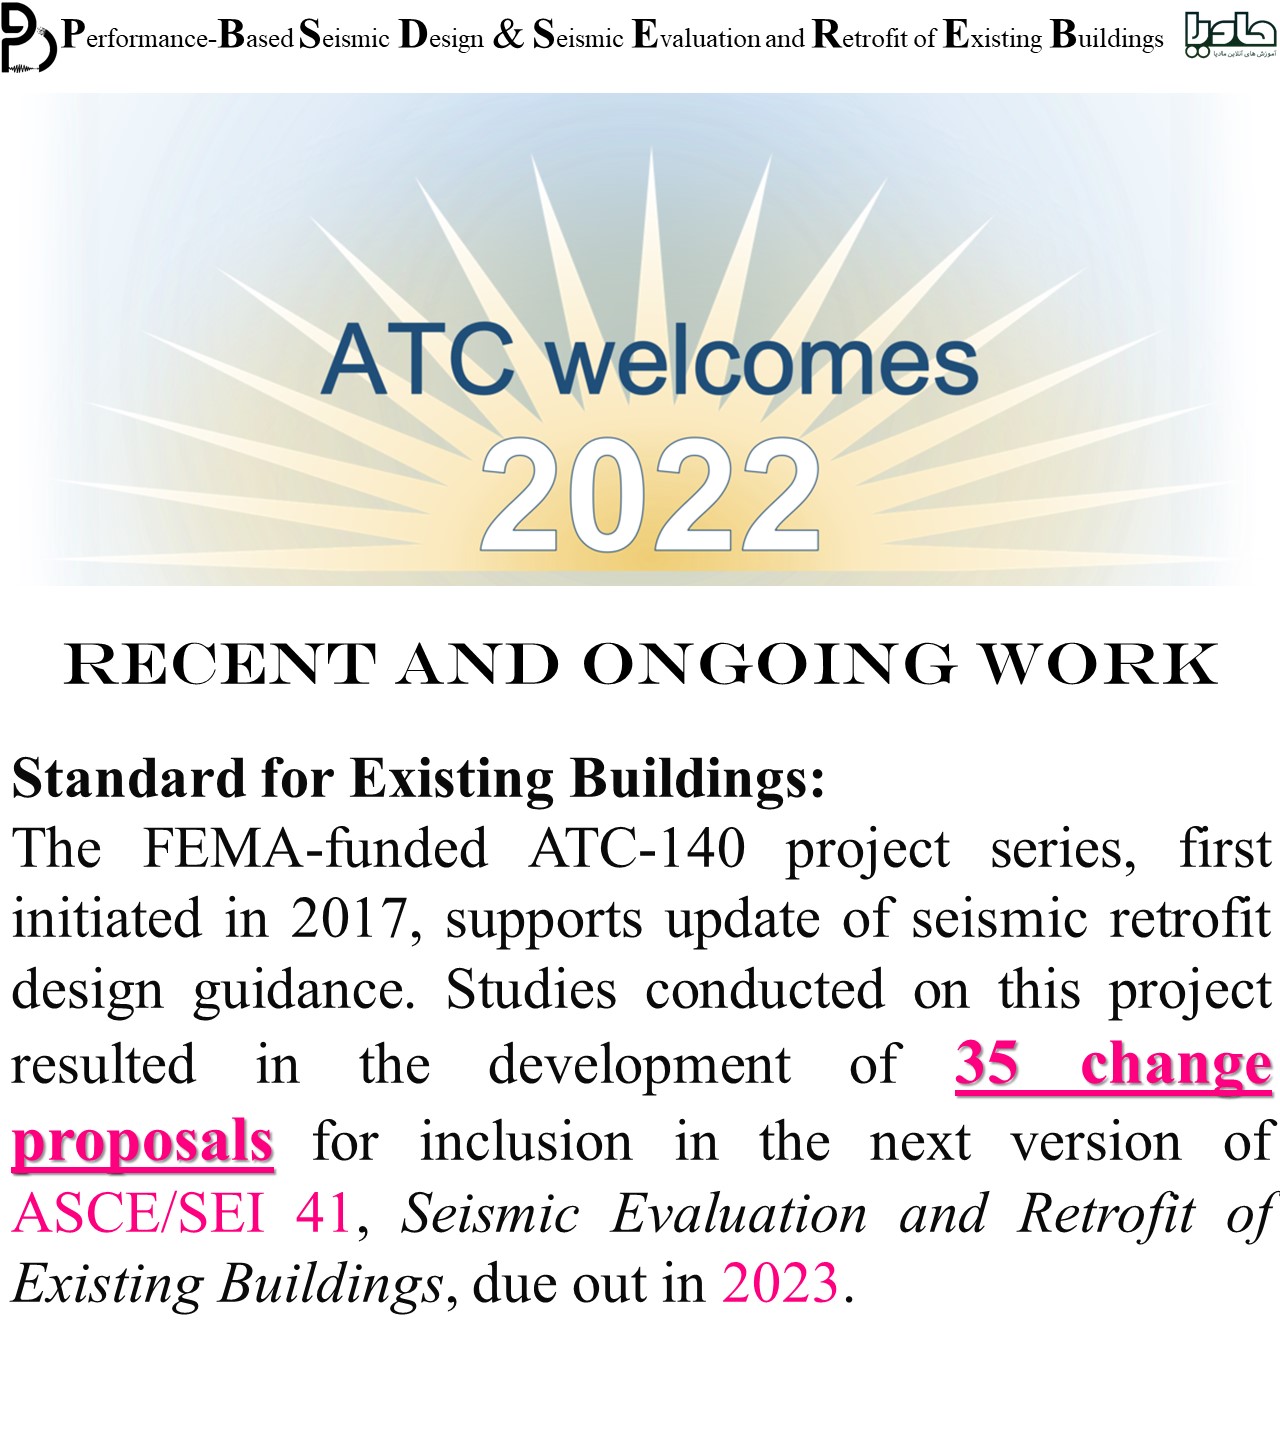 Development of 35 change proposals for inclusion in the next version of ASCE/SEI 41 (ASCE 41-23)